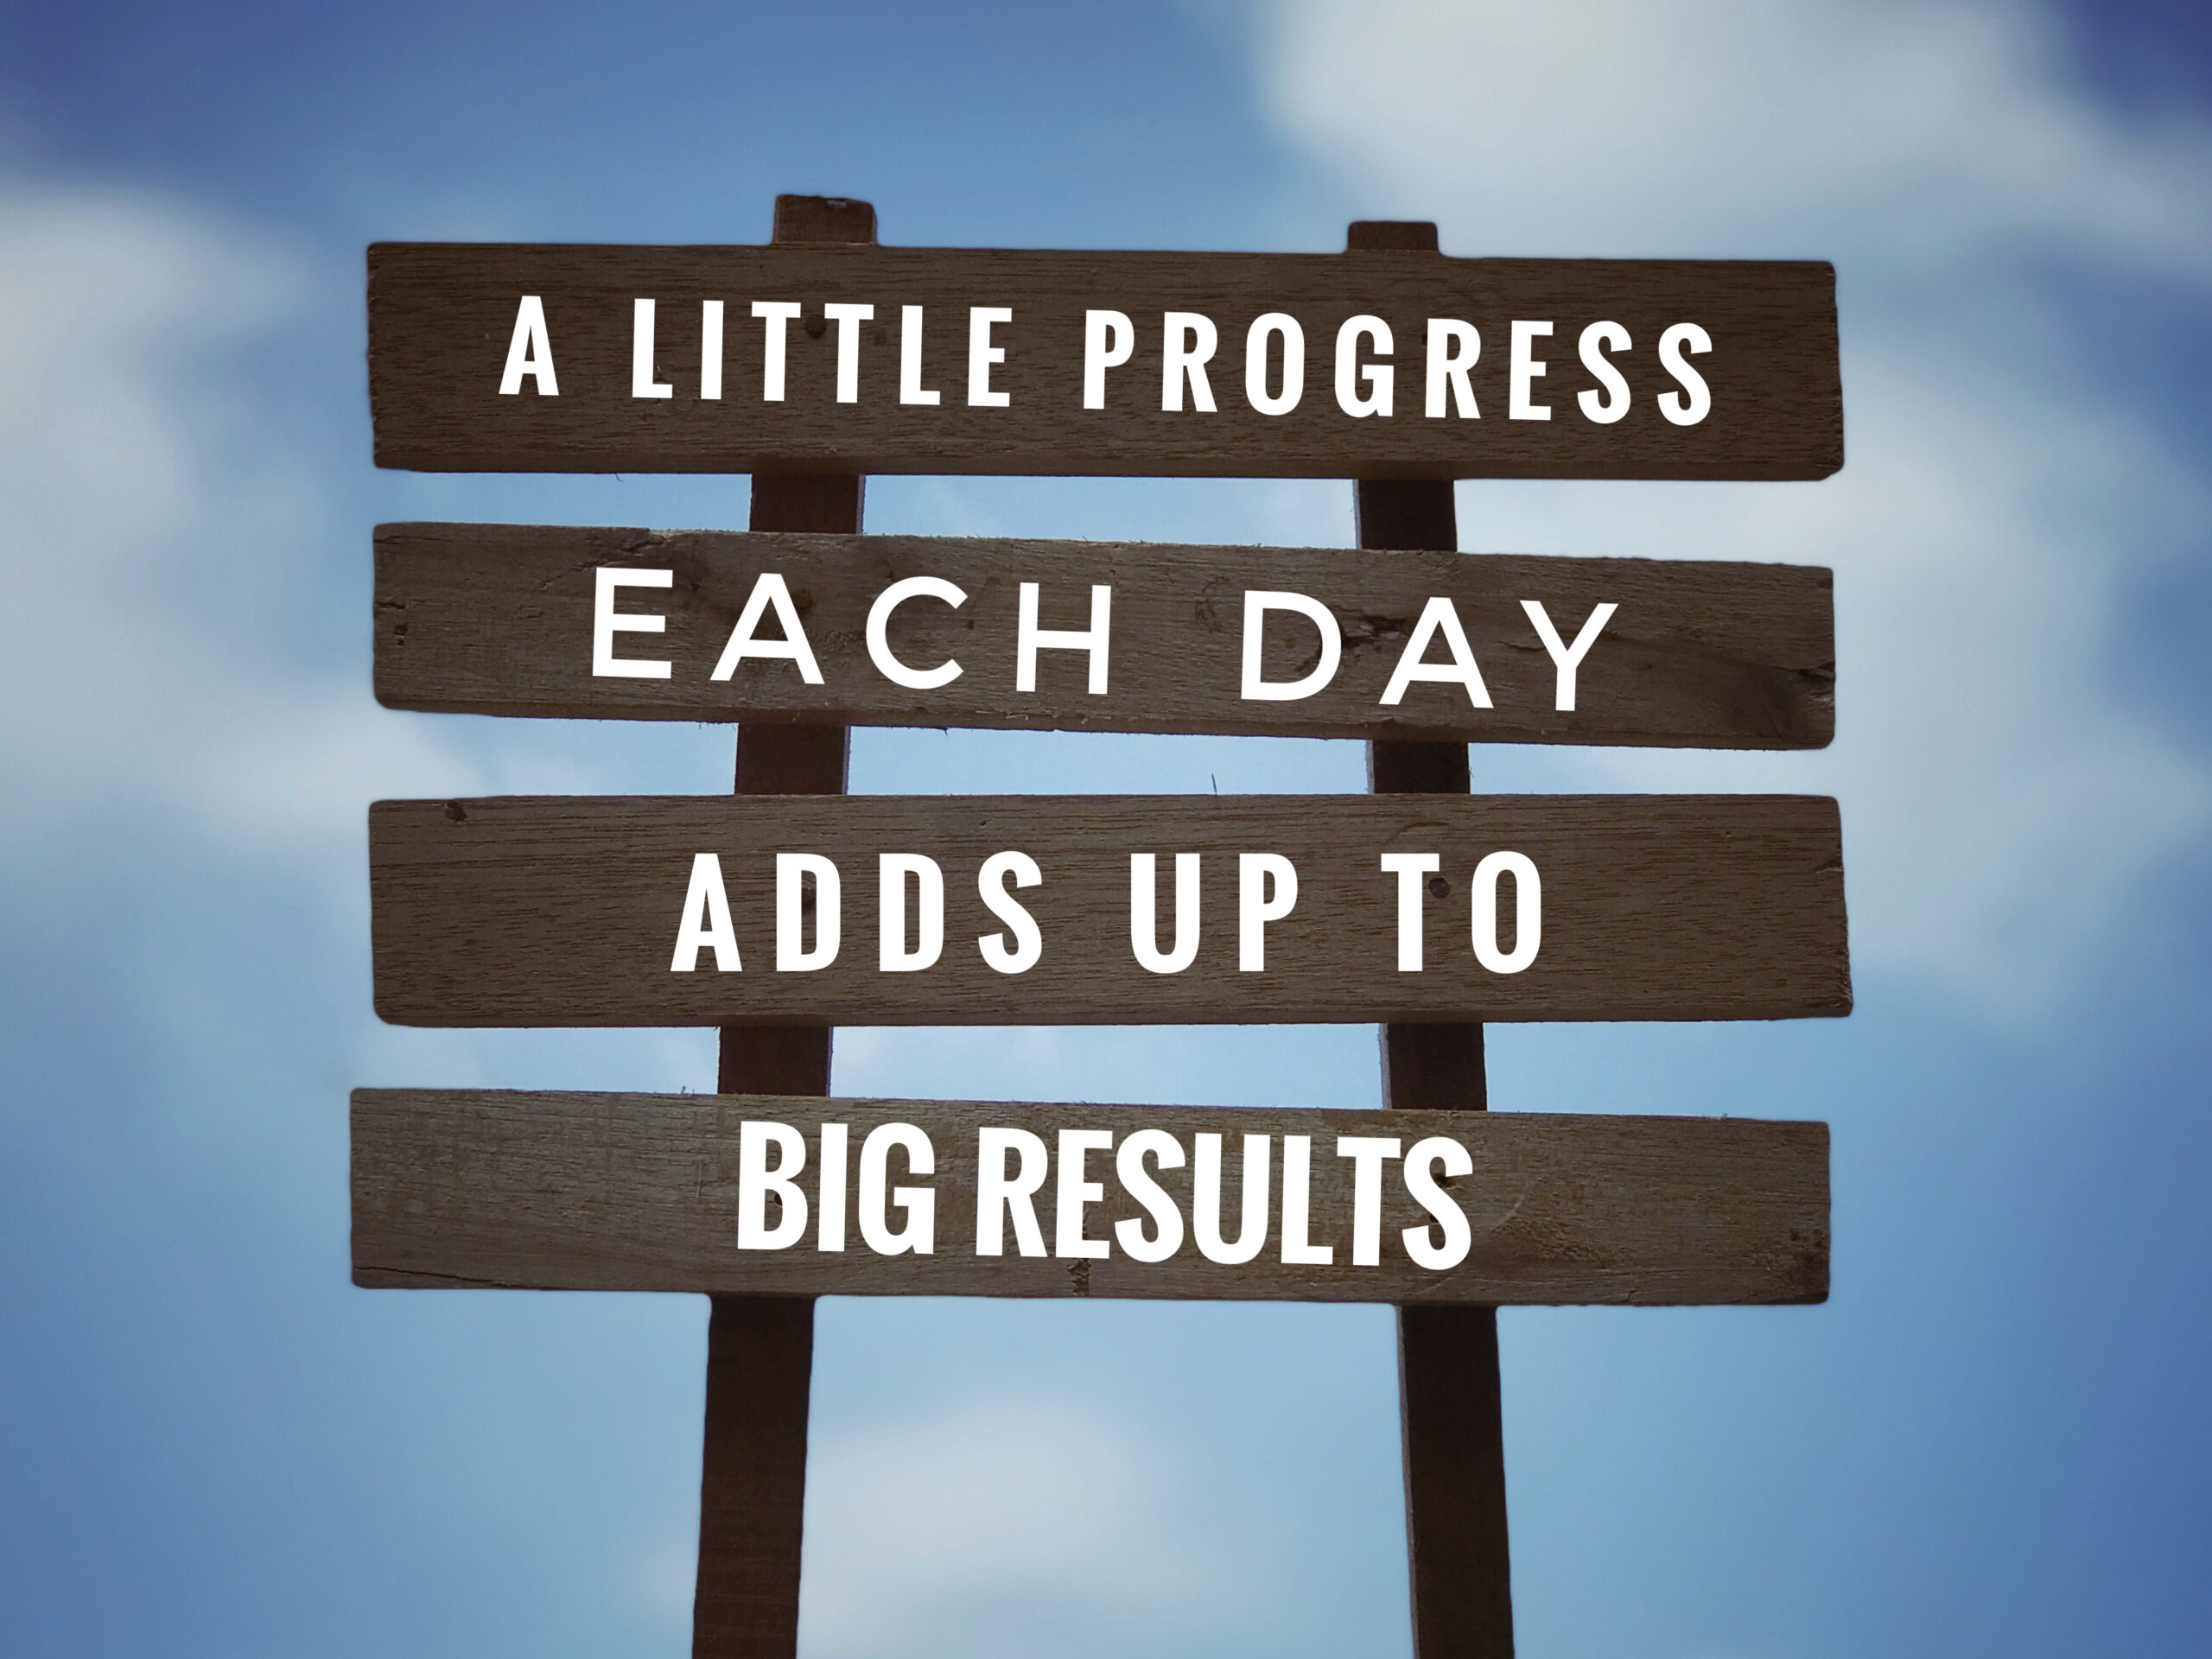 Motivational And Inspirational Quote ‘A Little Progress Each